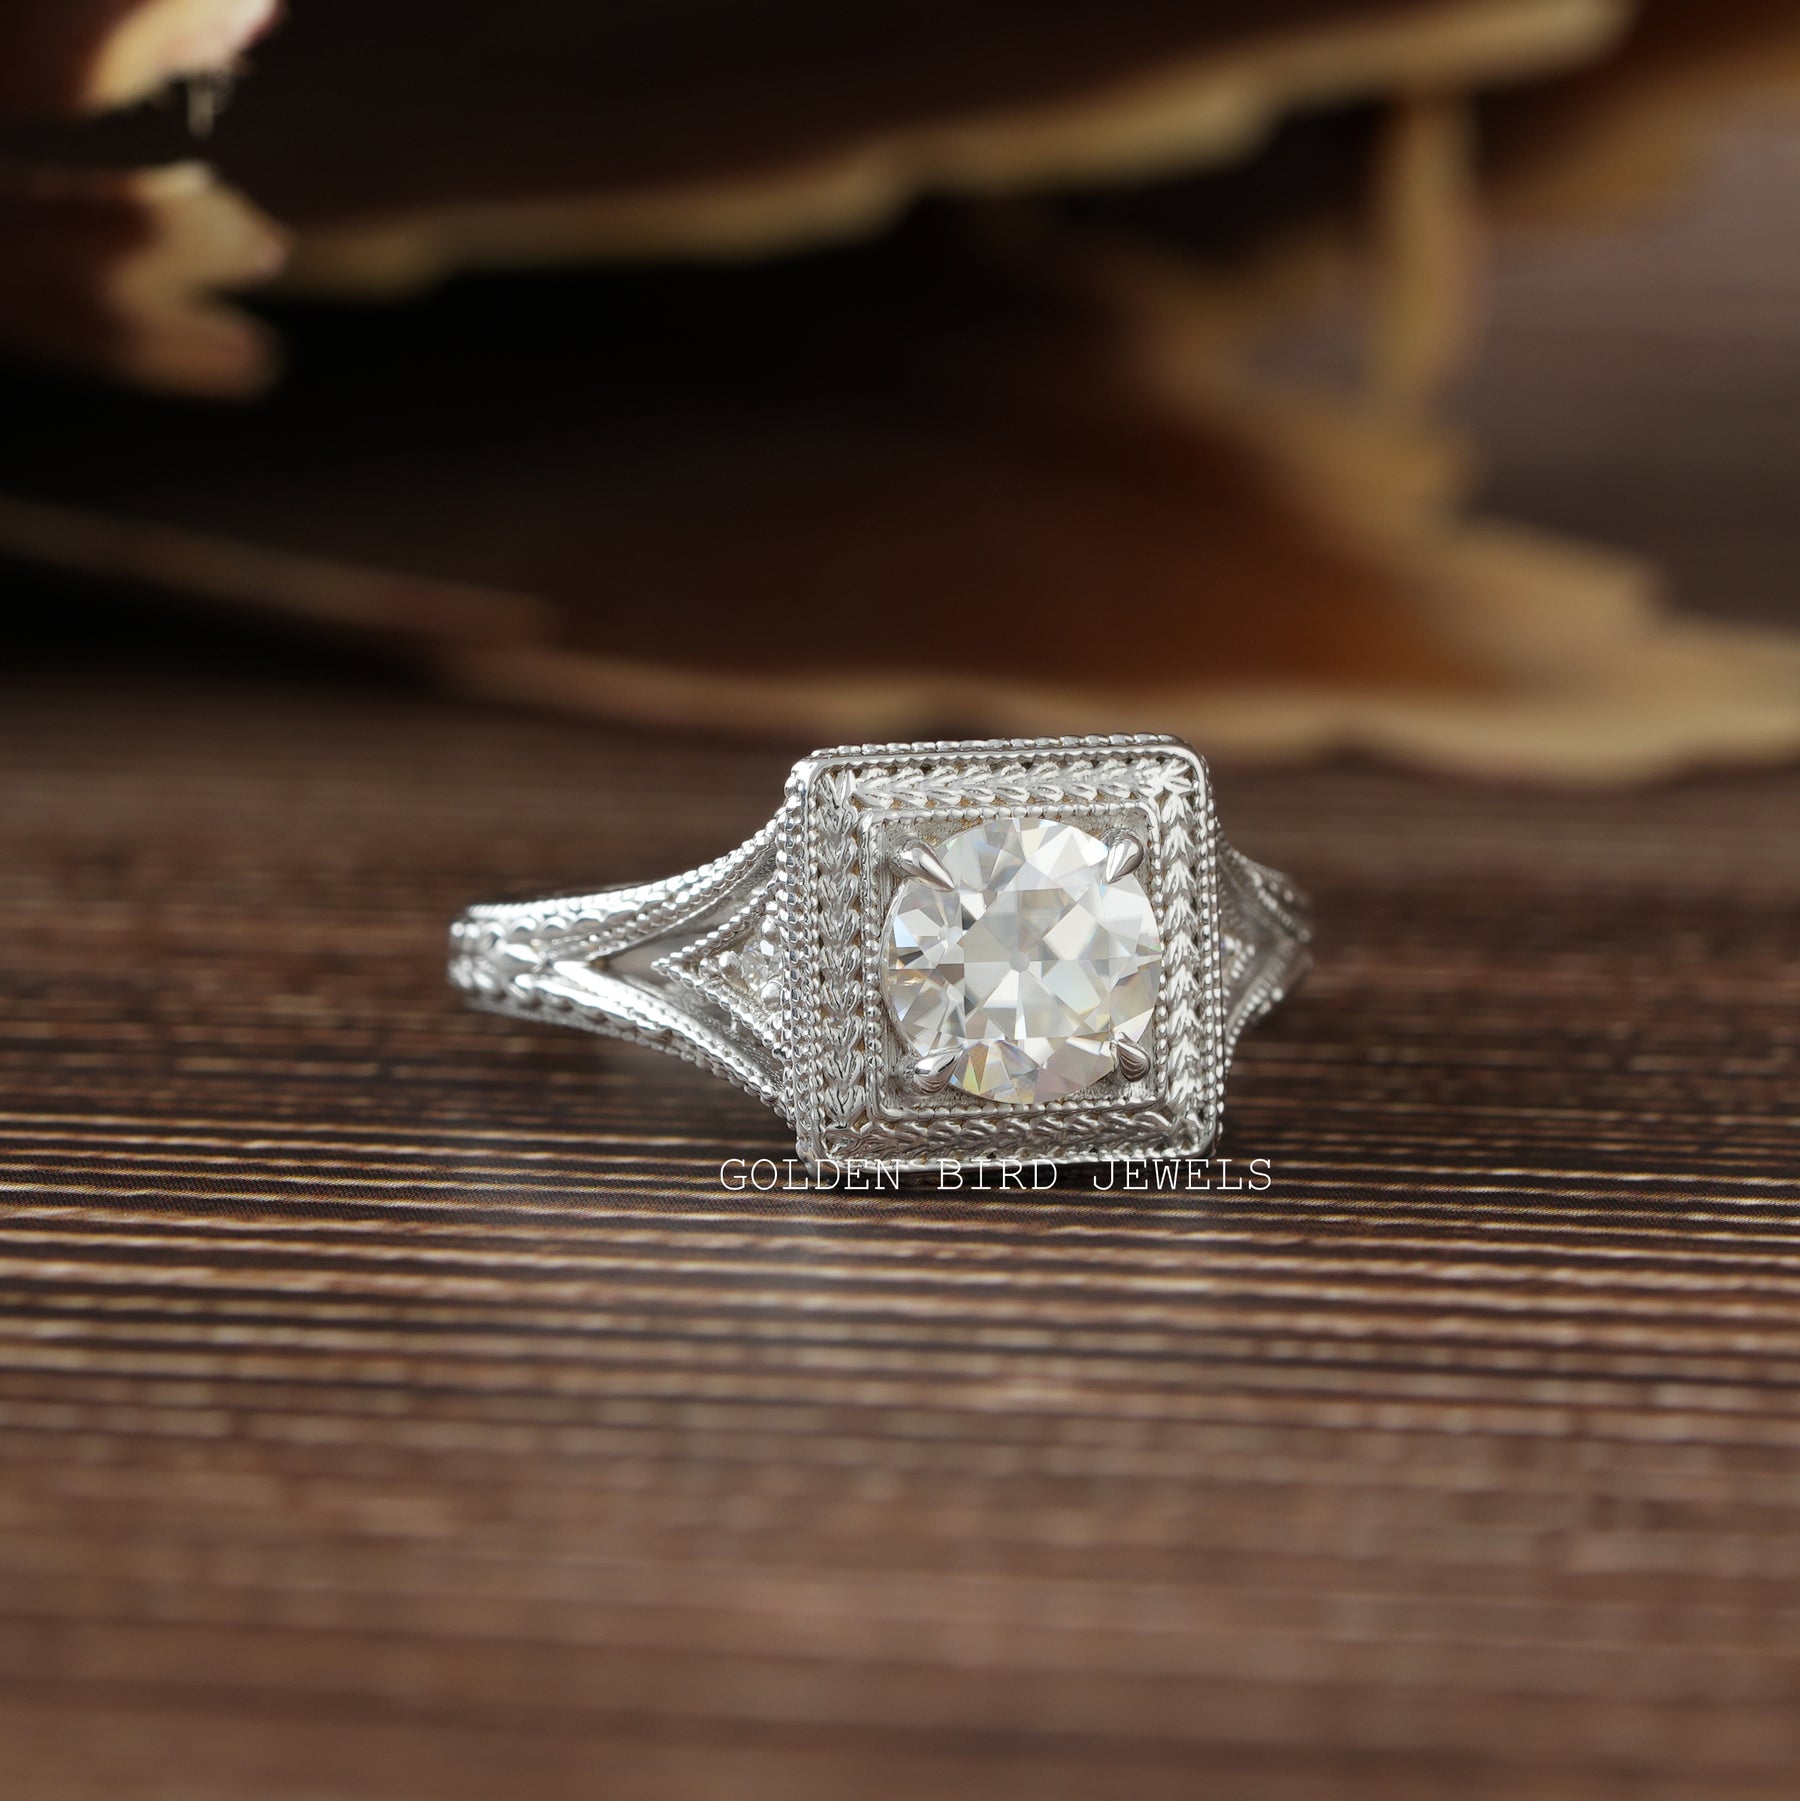 [Vintage style moissanite ring made of white gold available at golden bird jewels]